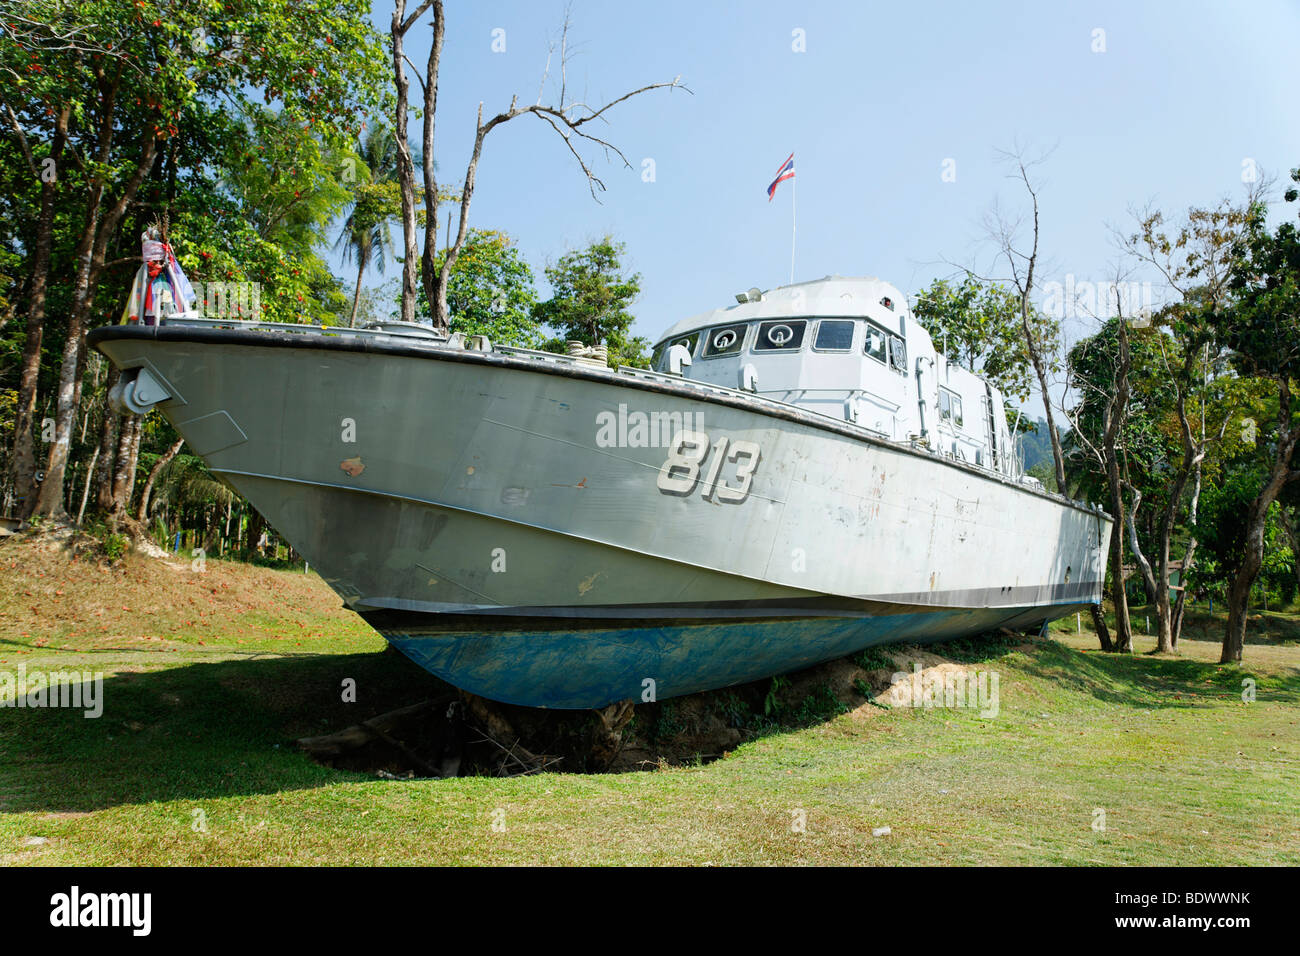 Speedboat of coast guard was landed by the tsunami on 26th of December 2004, today memorial, Khao Lak, Phuket, Thailand, Asia Stock Photo